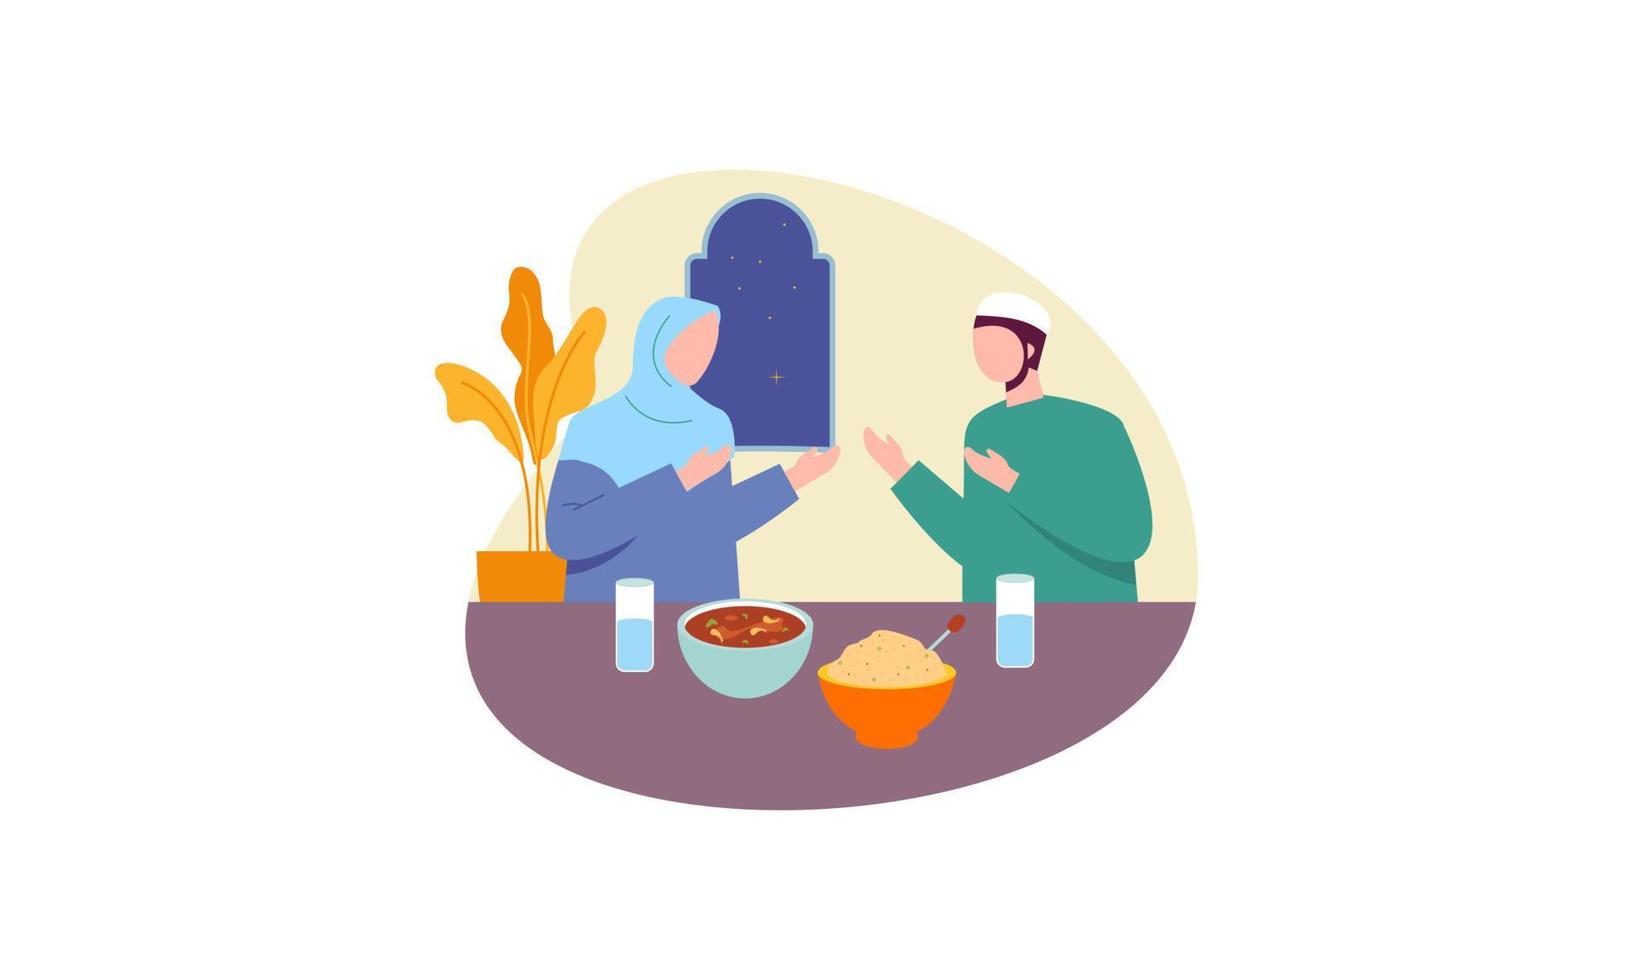 Iftar party with family during ramadan, meal with muslim family, ramadan fasting illustration vector